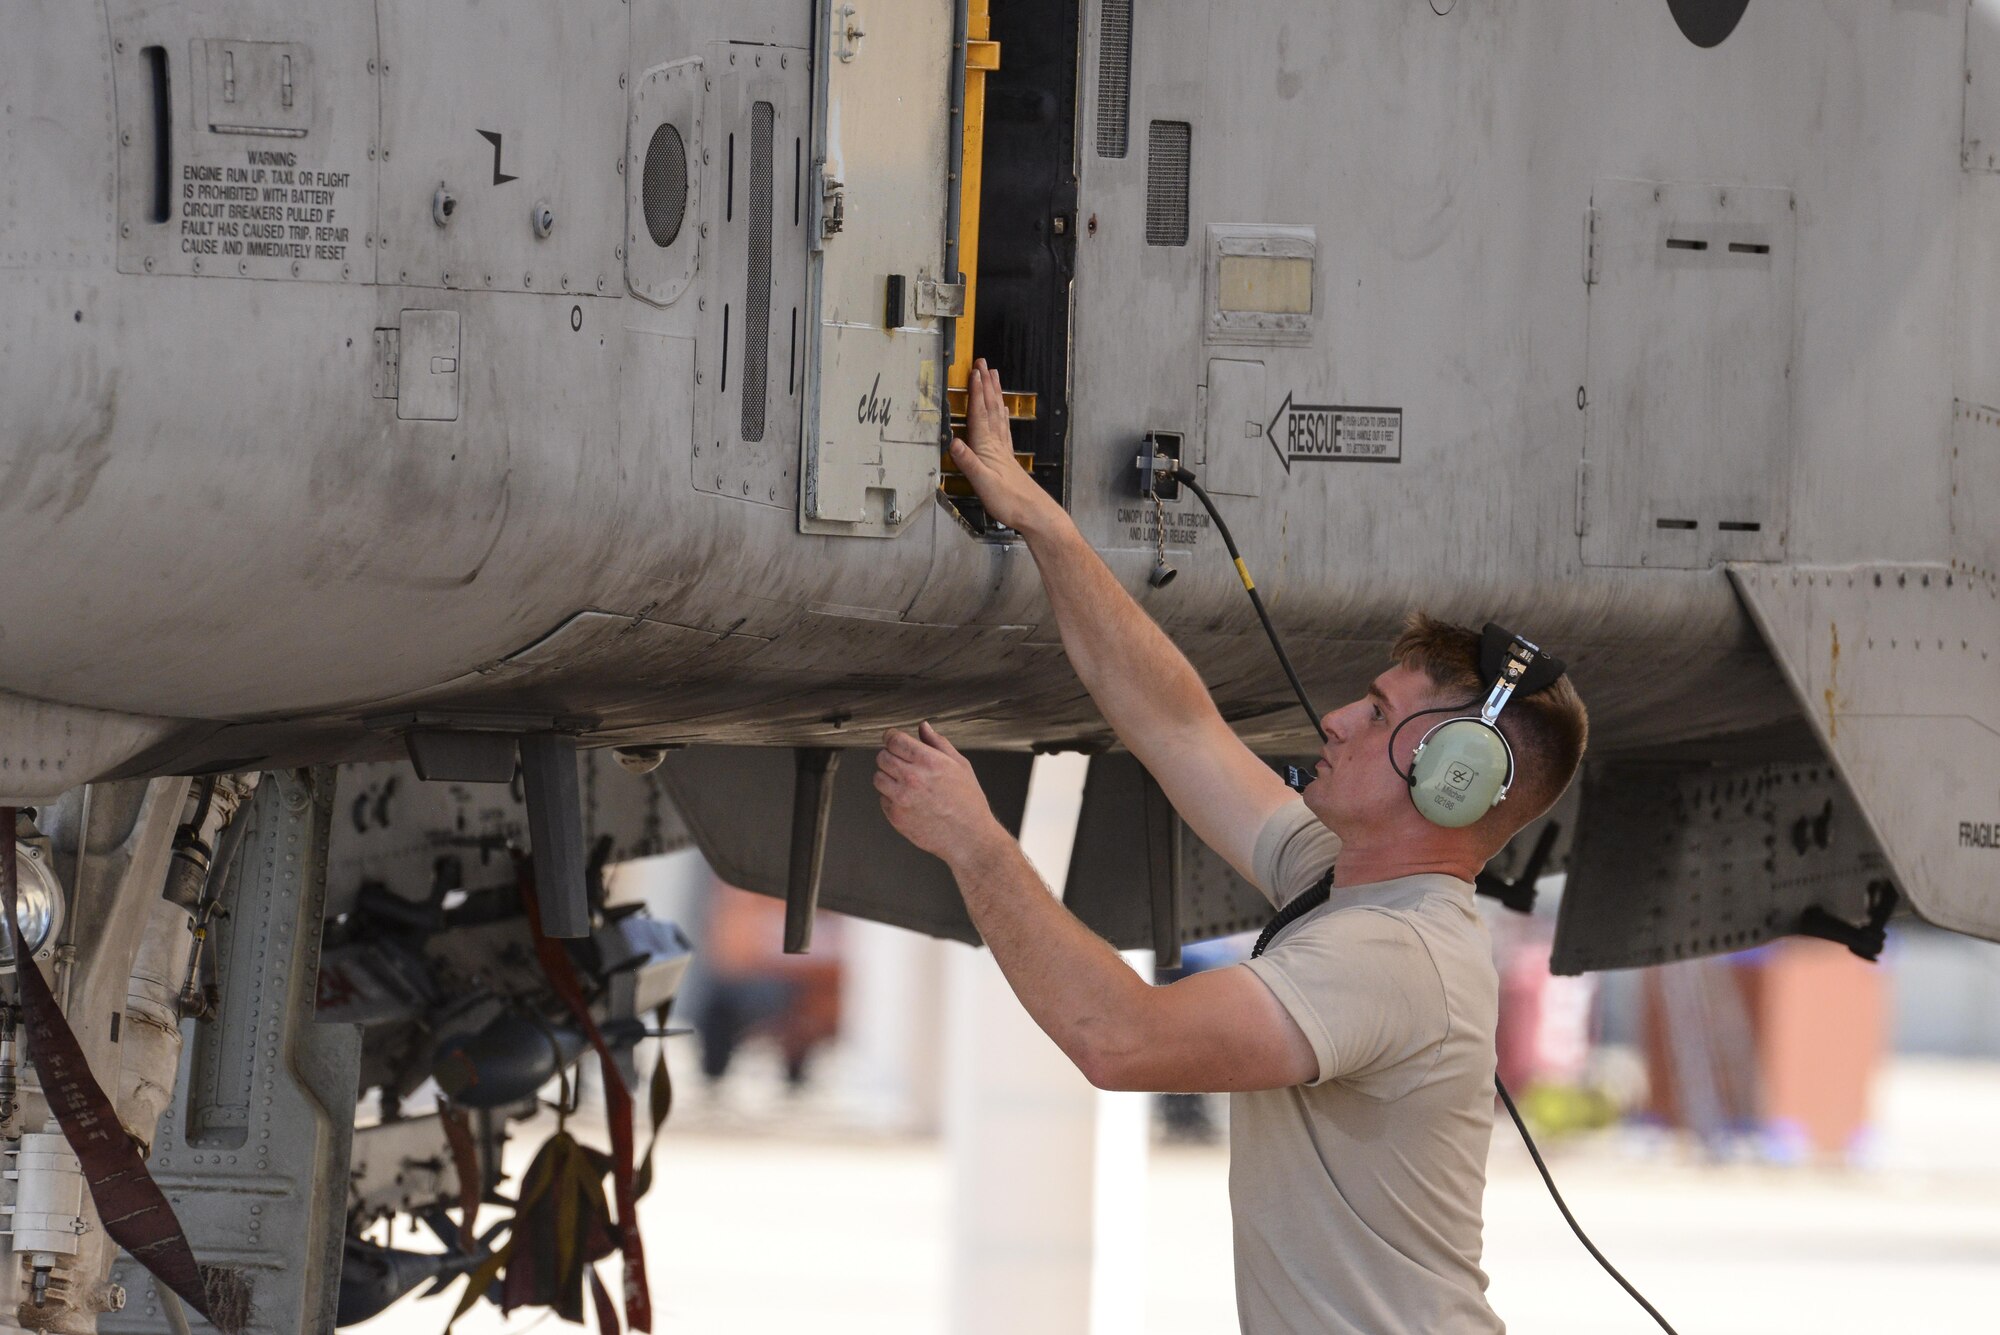 U.S. Air Force Airman 1st Class Jake Mitchell, 355th Aircraft Maintenance Squadron A-10C Thunderbolt II crew chief, prepares an A-10 for launch at Davis-Monthan Air Force Base, Ariz., July 14, 2017. The primary function of the A-10 is close air support, airborne forward air control and combat search and rescue. (U.S. Air Force photo by Senior Airman Mya M. Crosby)